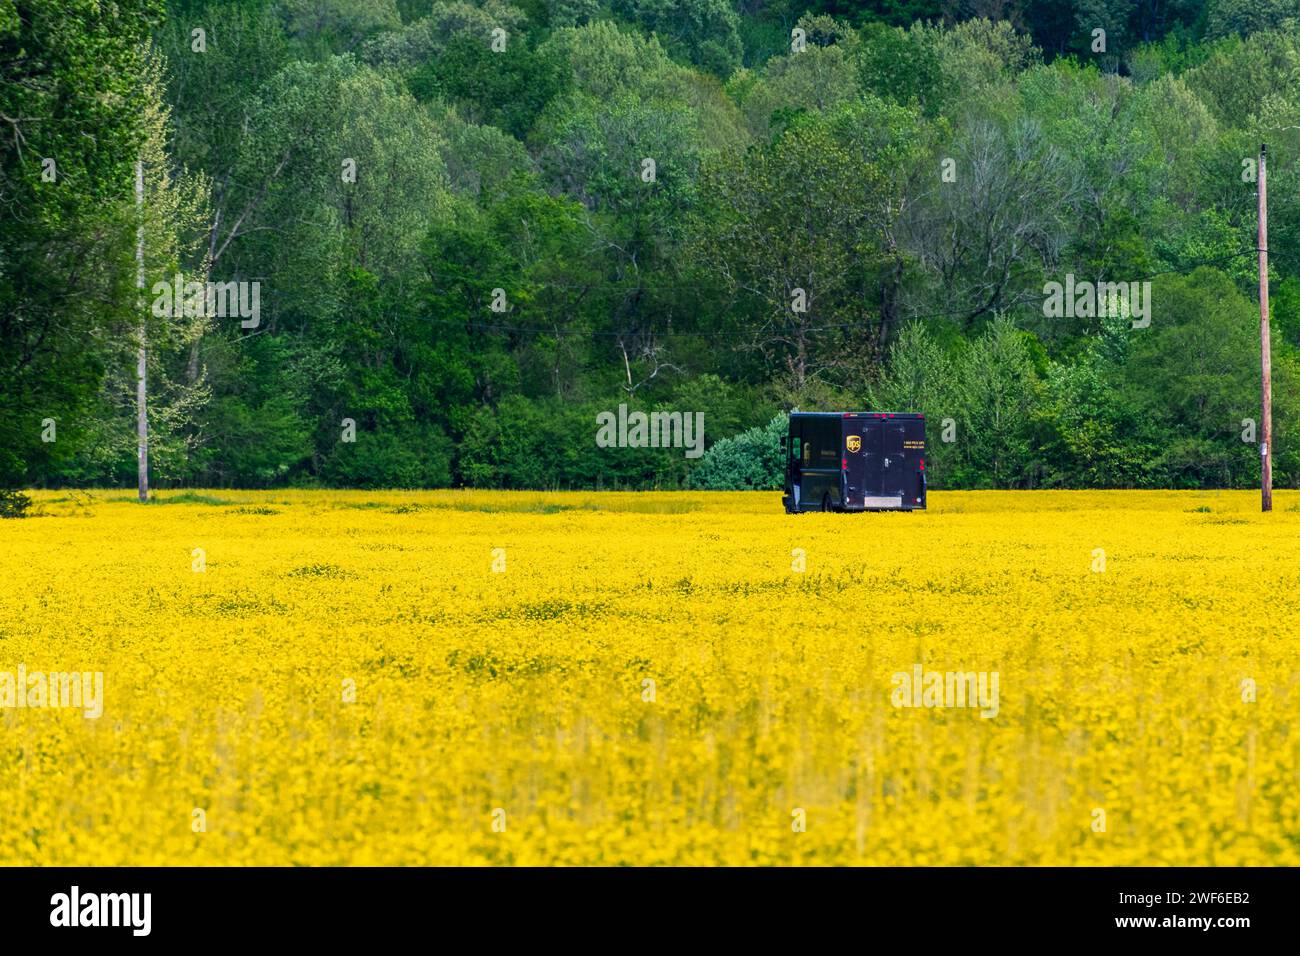 A solitary UPS delivery truck is captured meandering down a rural road, surrounded by the bright yellow bloom of a vast field under a clear sky. Stock Photo